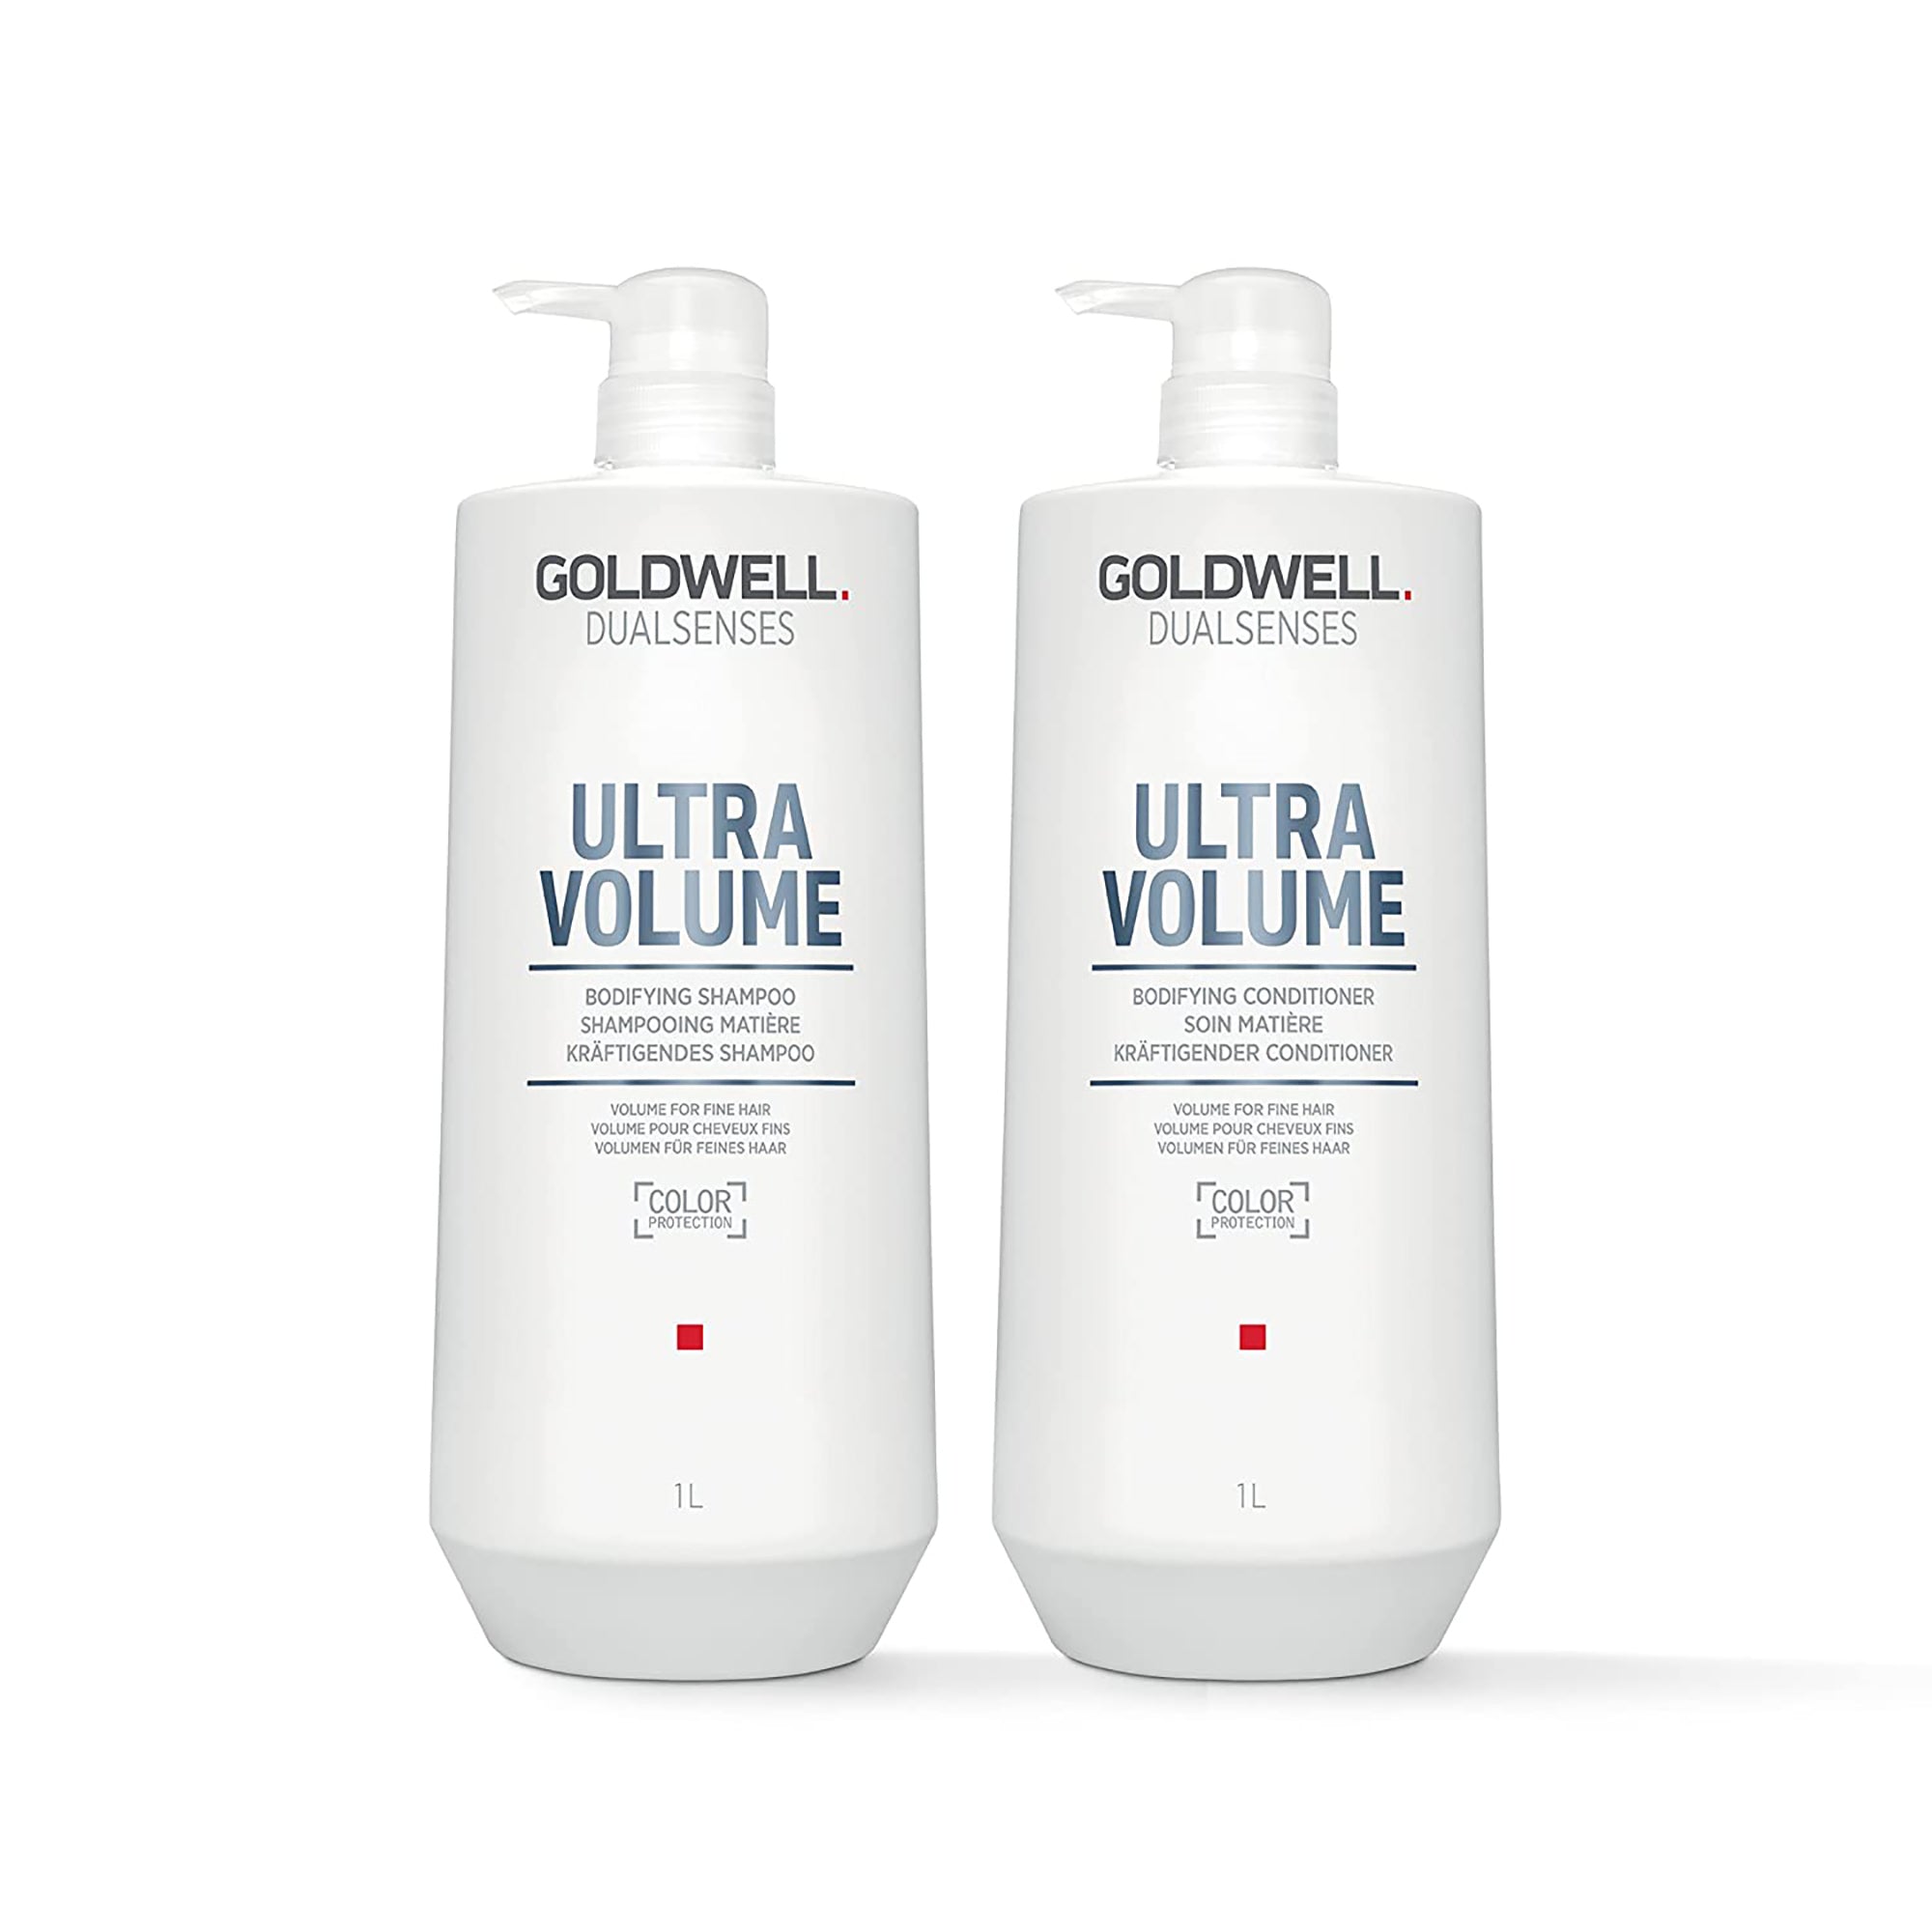 Goldwell Dual Sense Ultra Volume Shampoo and Conditioner Liter Duo ($85 Value) / 33OZ